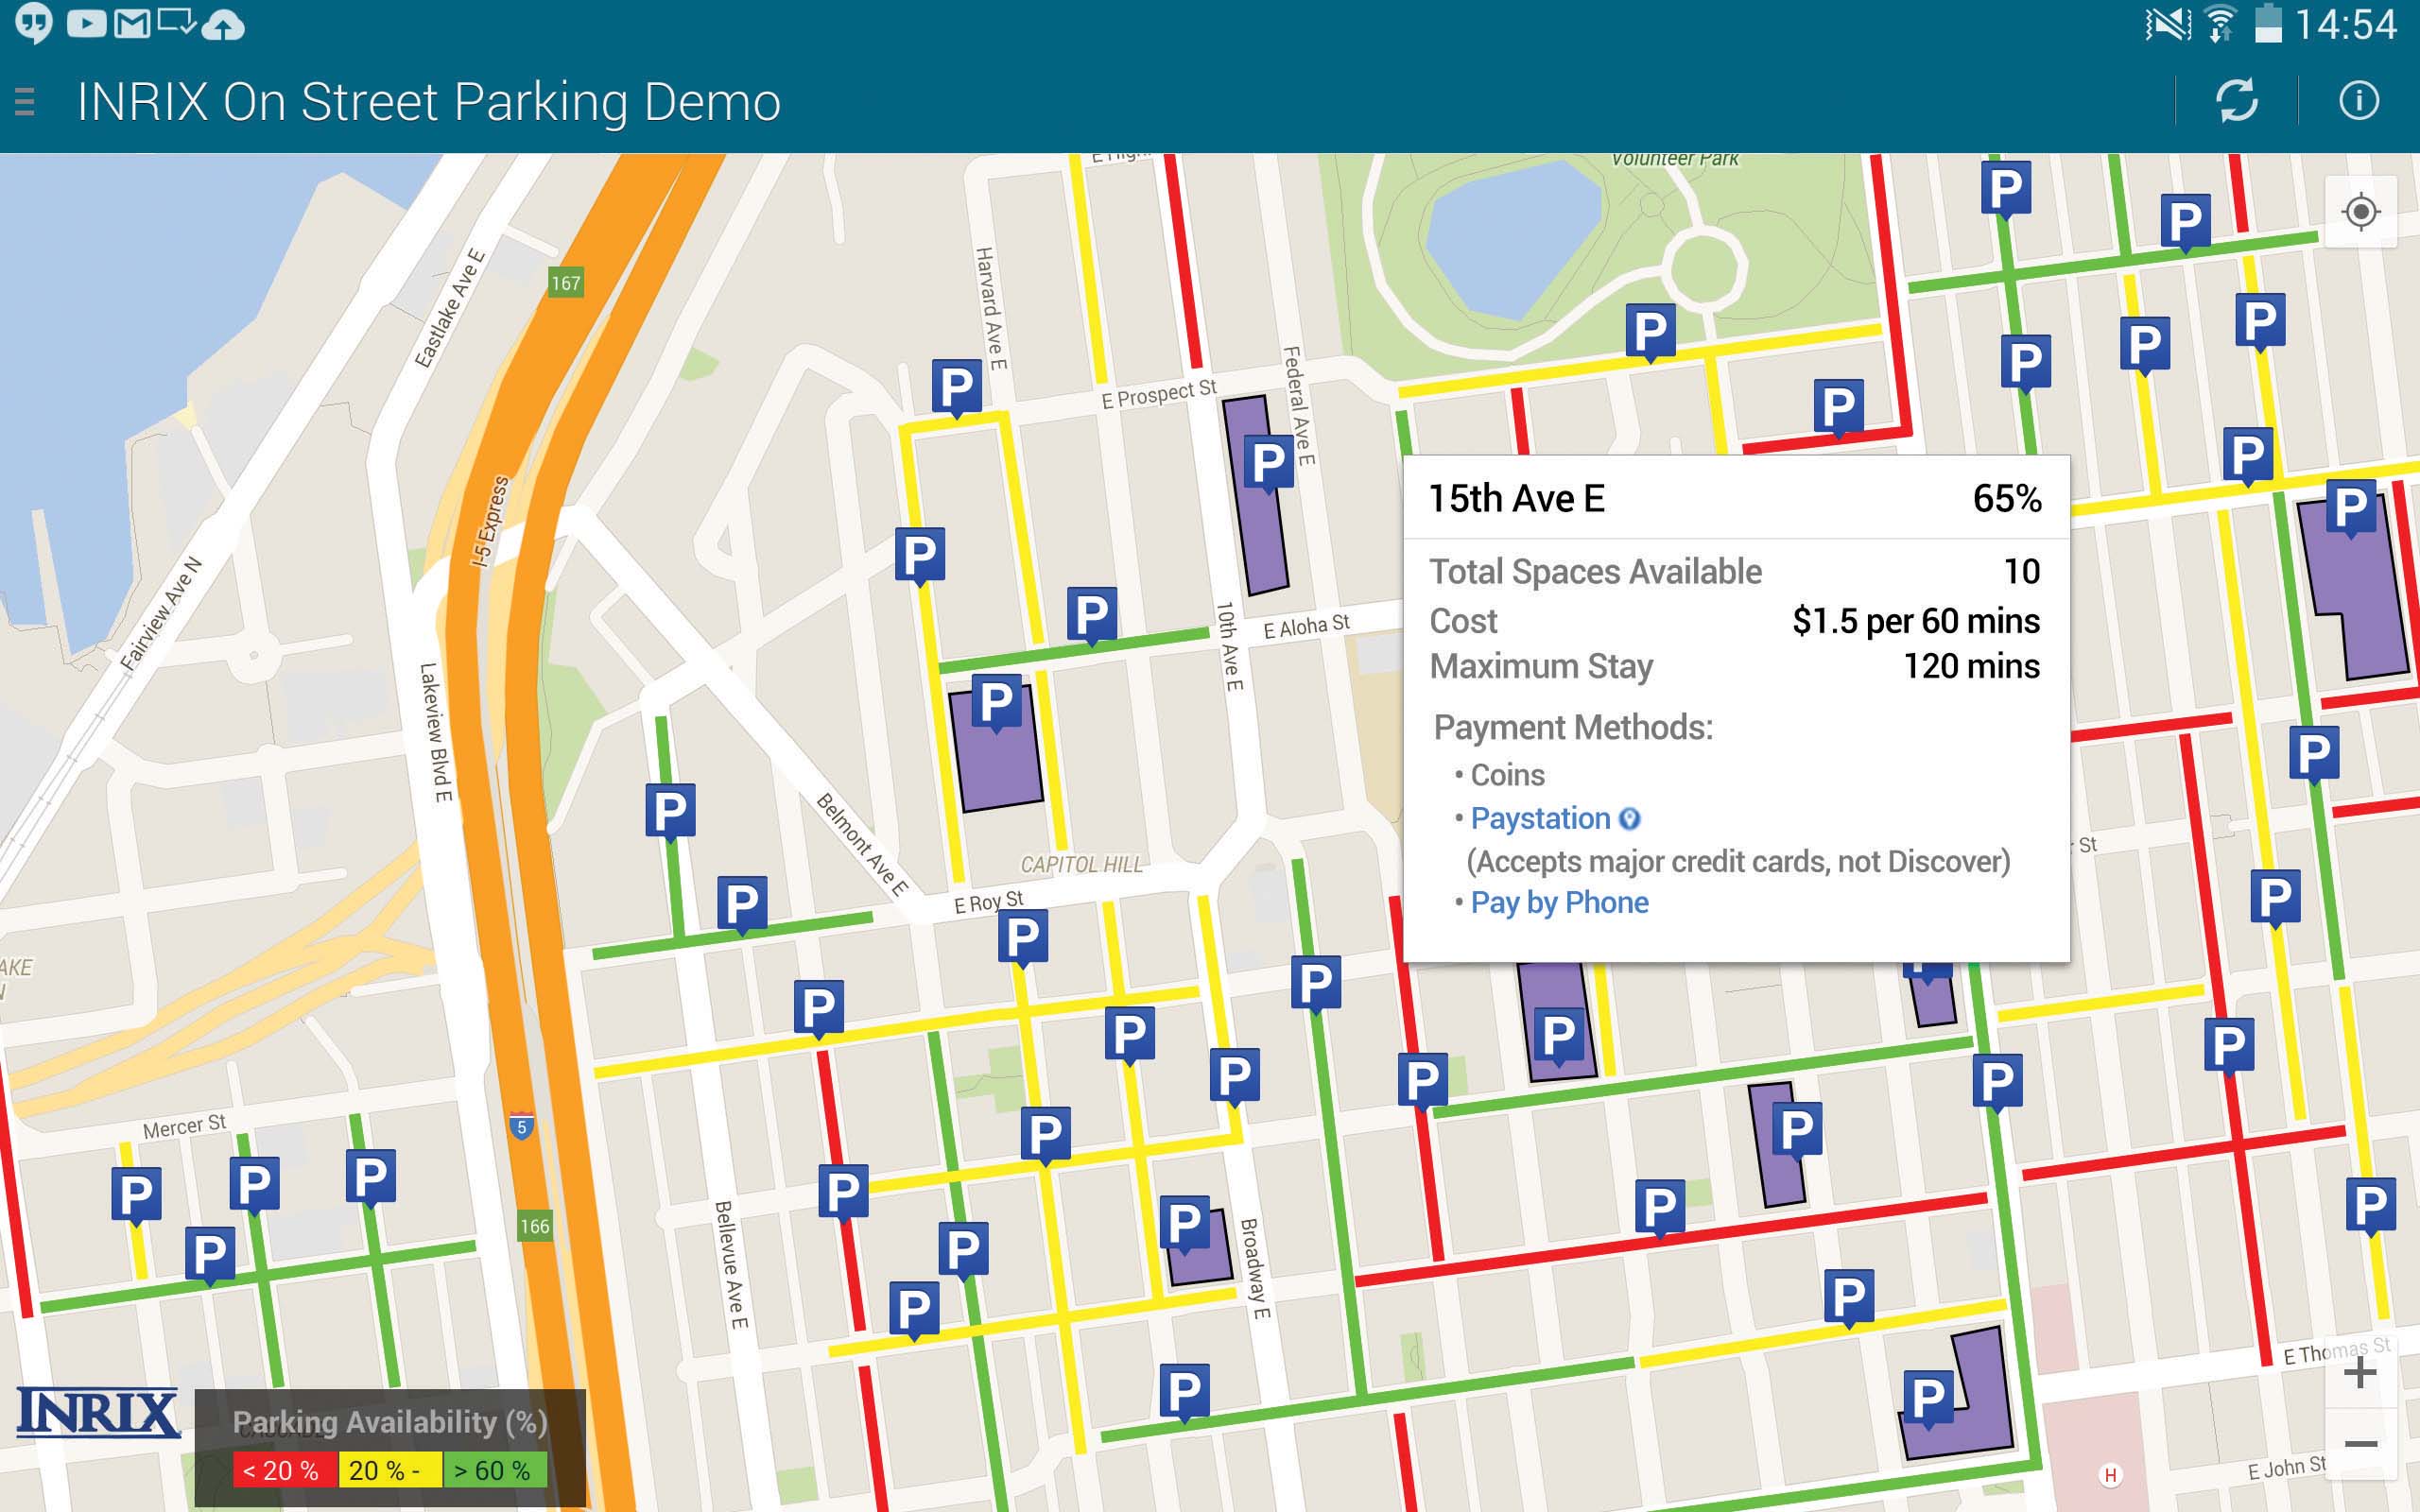 Availability of on-street parking.